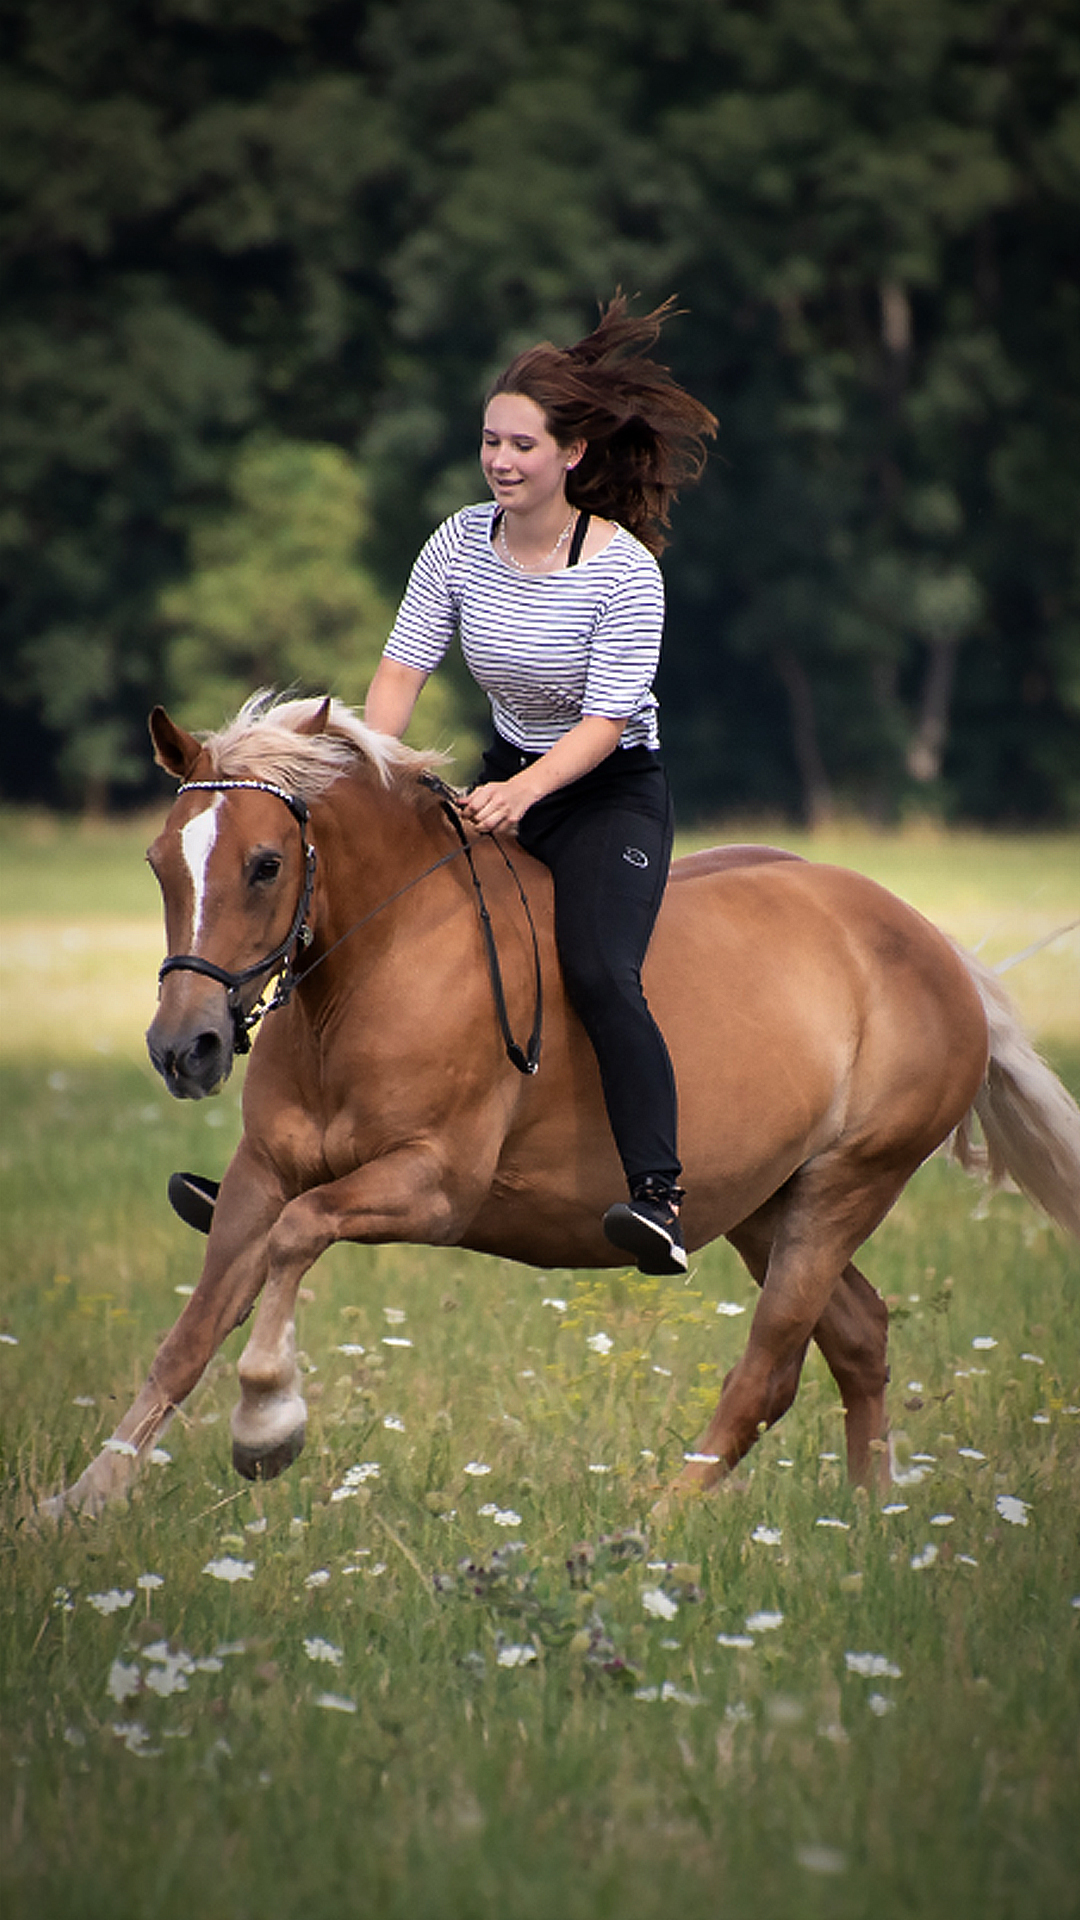 The Pros & Cons of Bareback Riding